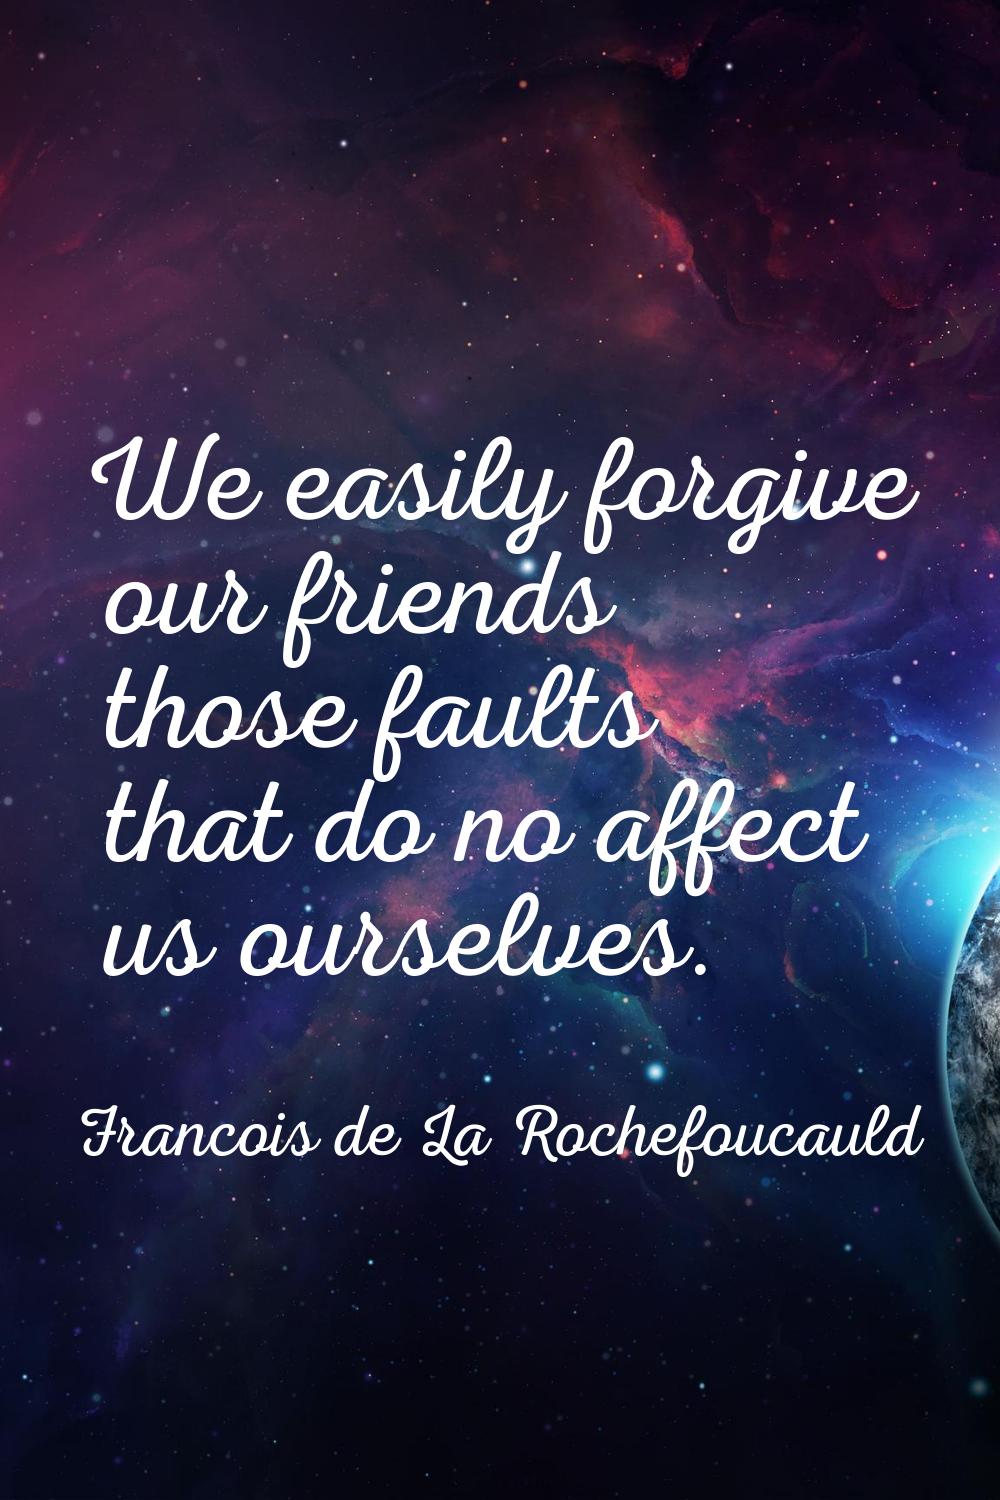 We easily forgive our friends those faults that do no affect us ourselves.